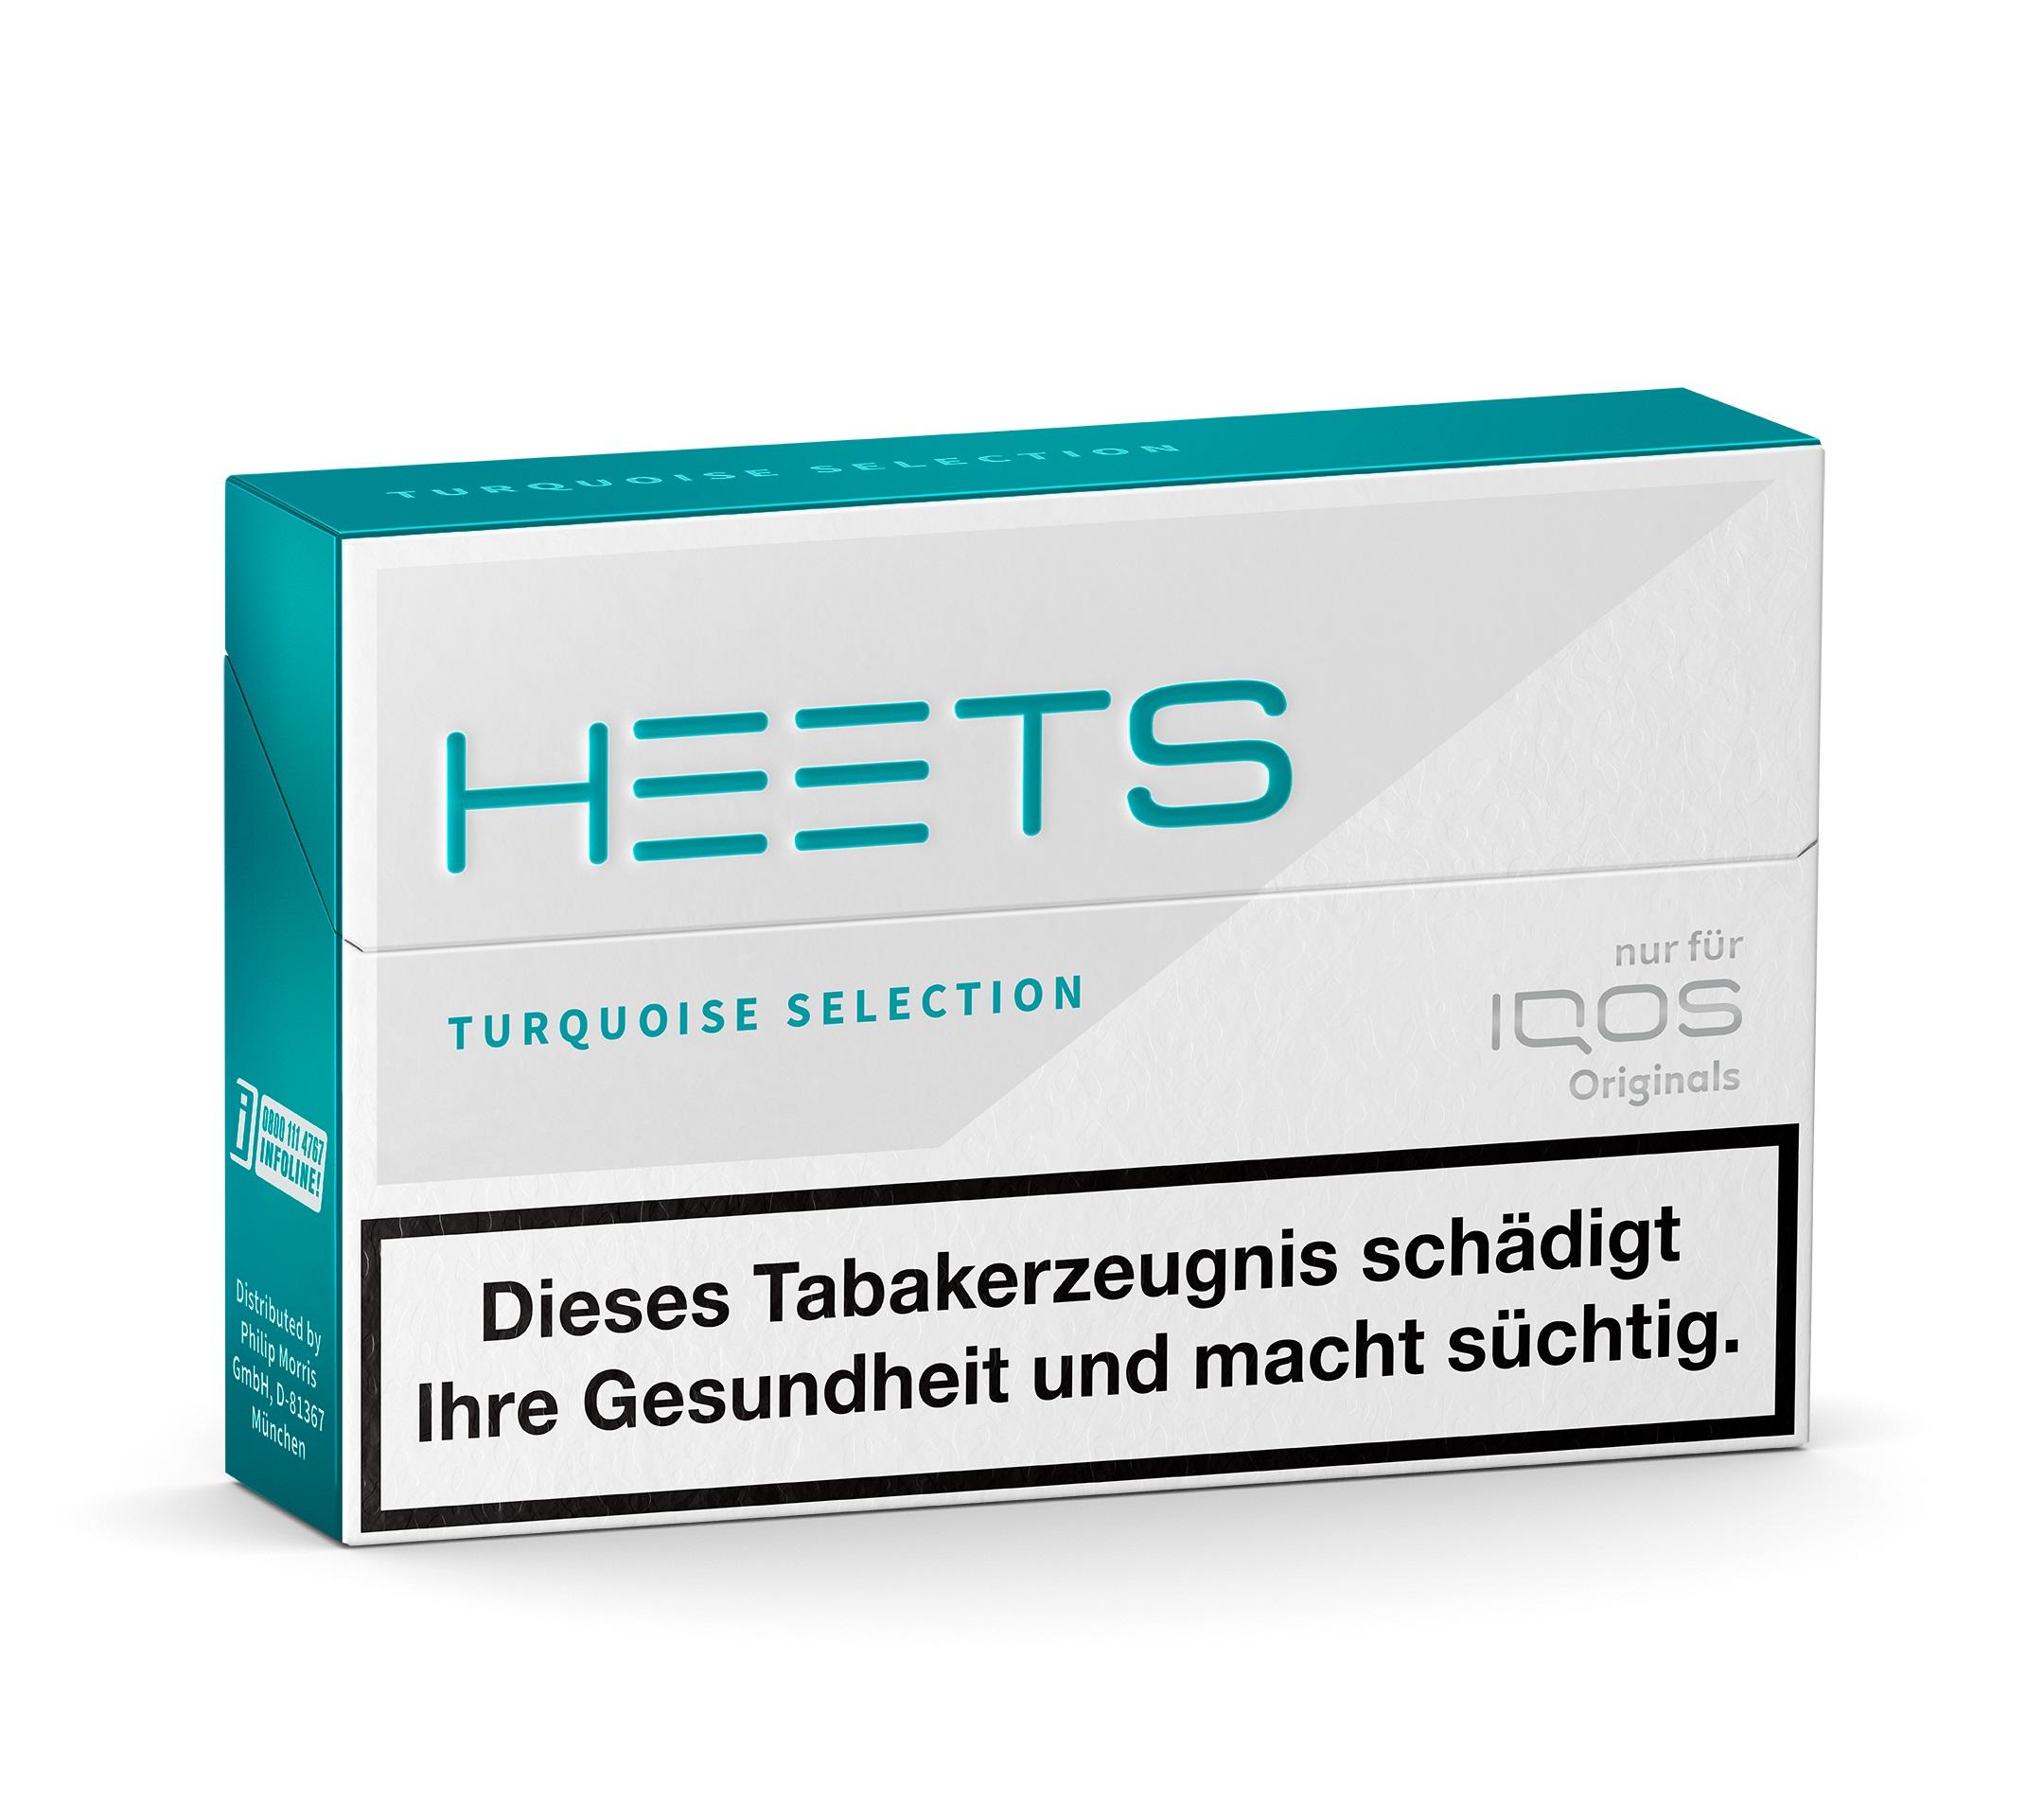 HEETS Turquoise Label 1 Packung